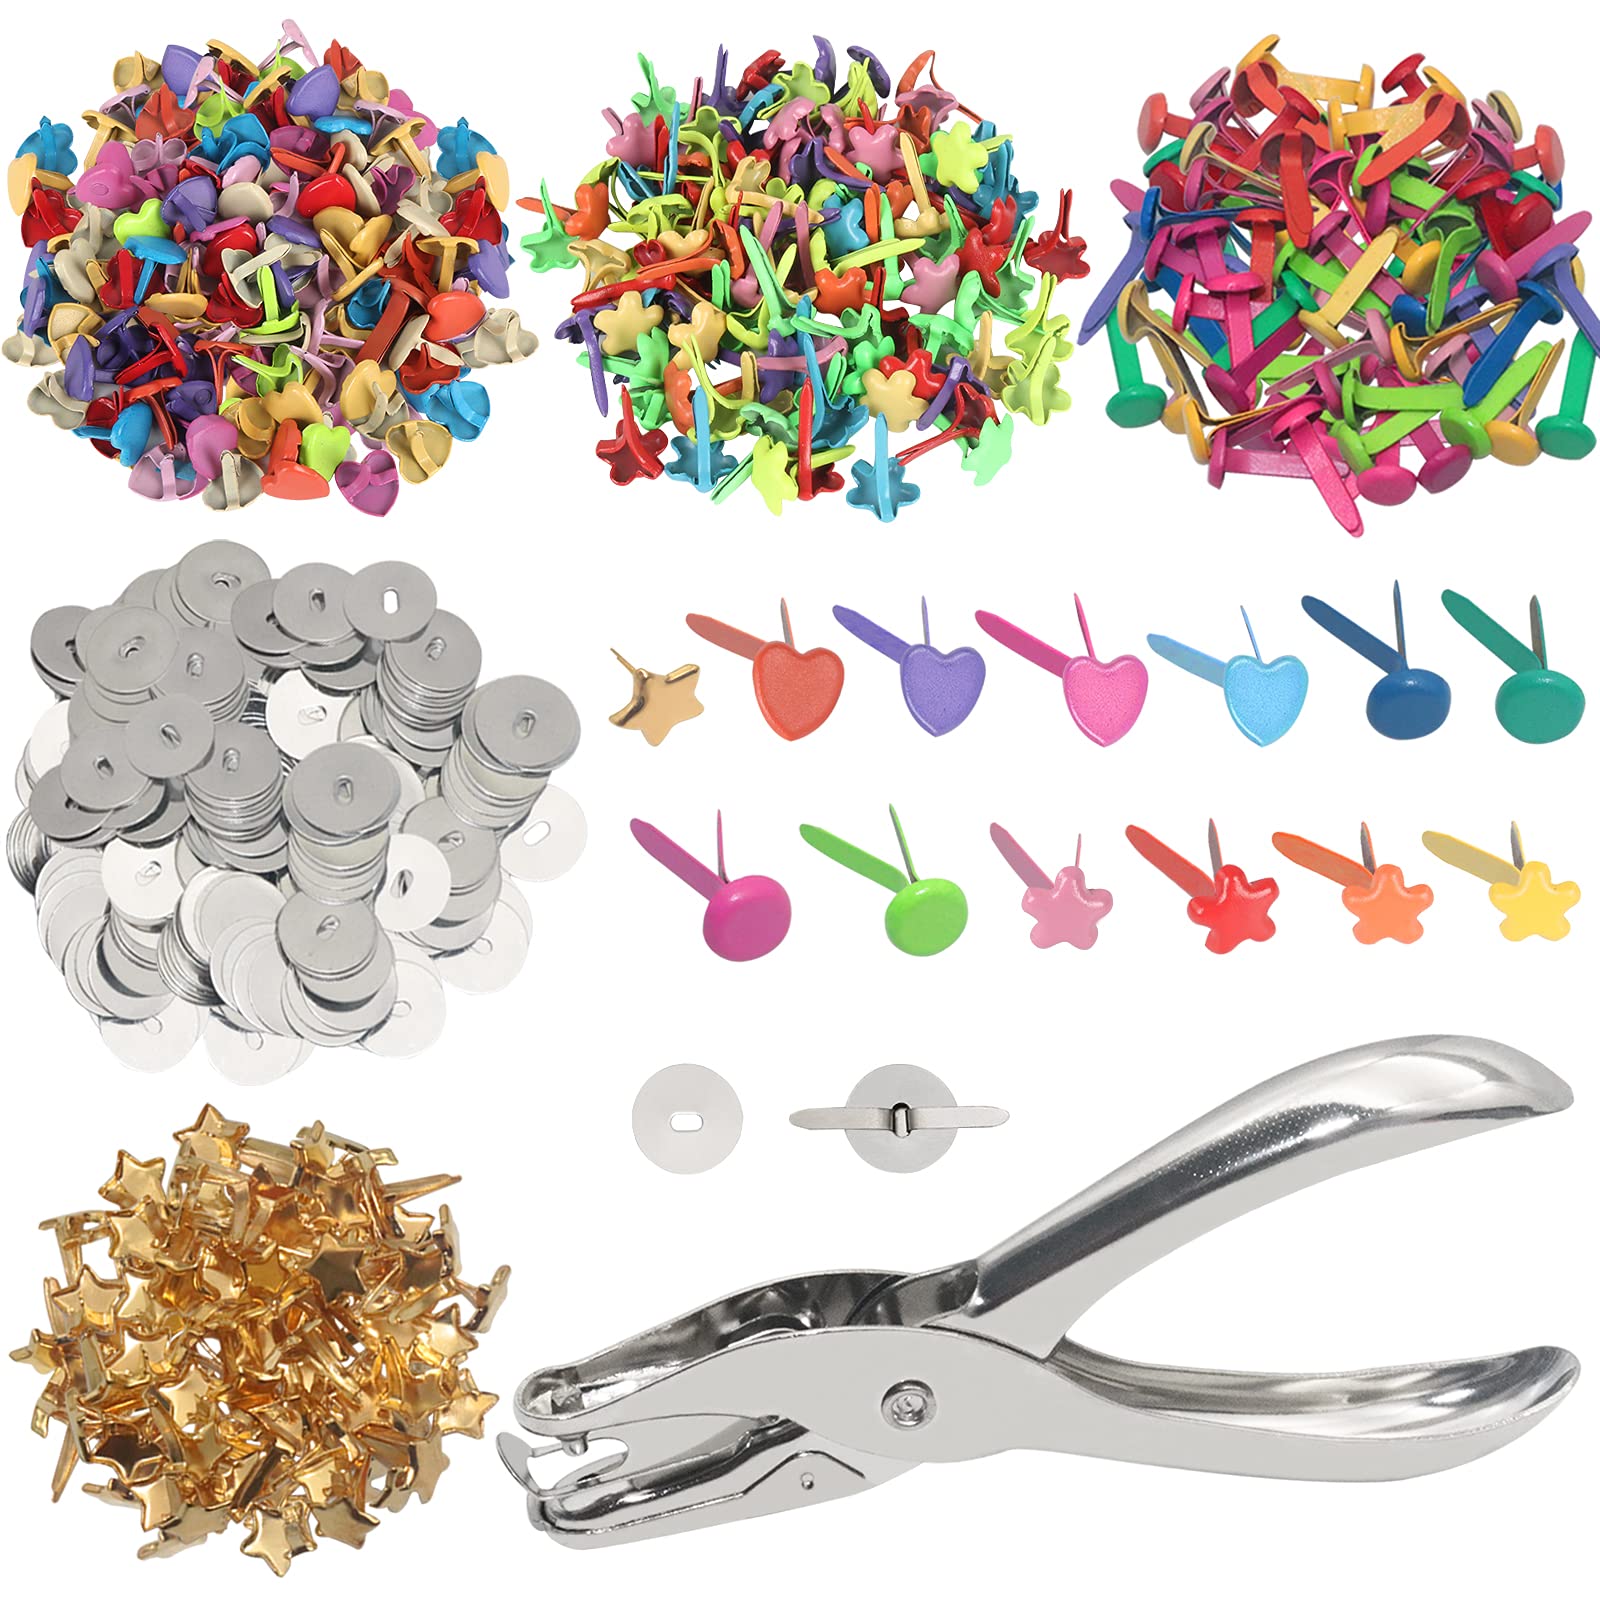 500PCS Mini Paper Brads, HNYYZL Paper Brass Fasteners Metal Brass Brads  with Box, Mini Round Head 8mm Paper Fasteners for Paper Crafts,  Scrapbooking, Paper Decoration, DIY Art (Colored 0.3 x 0.6 Inch)  Multicolored